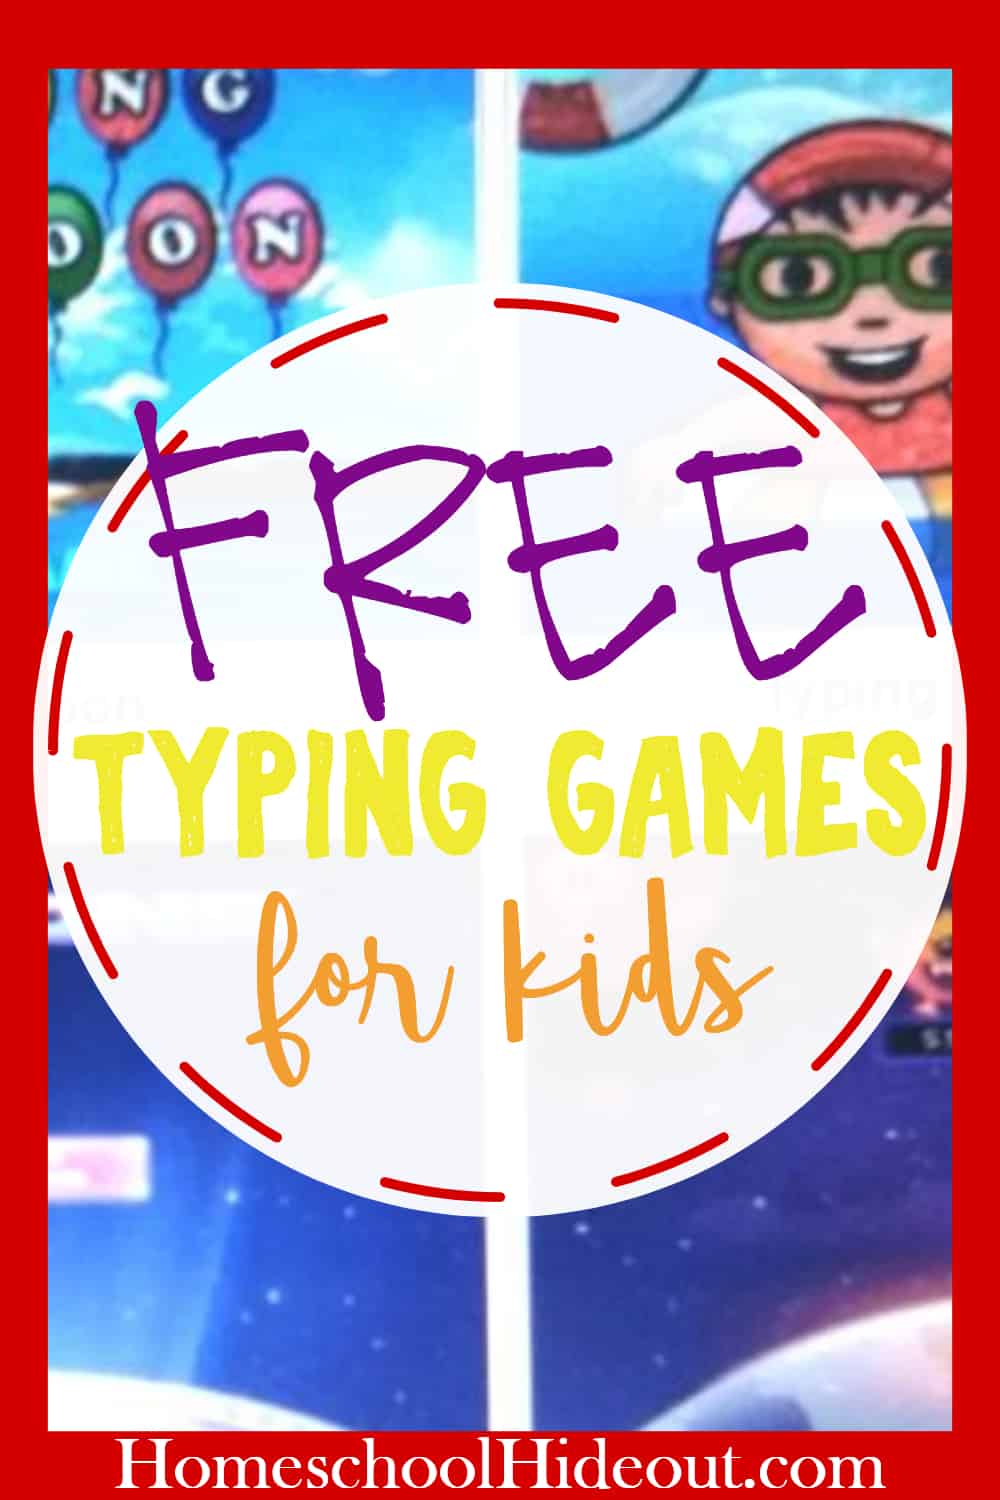 Check out these free typing games for kids! They'll learn home row and so much more, while having fun! #typingclass #typing #typinggames #homeschoolers #homeschooling